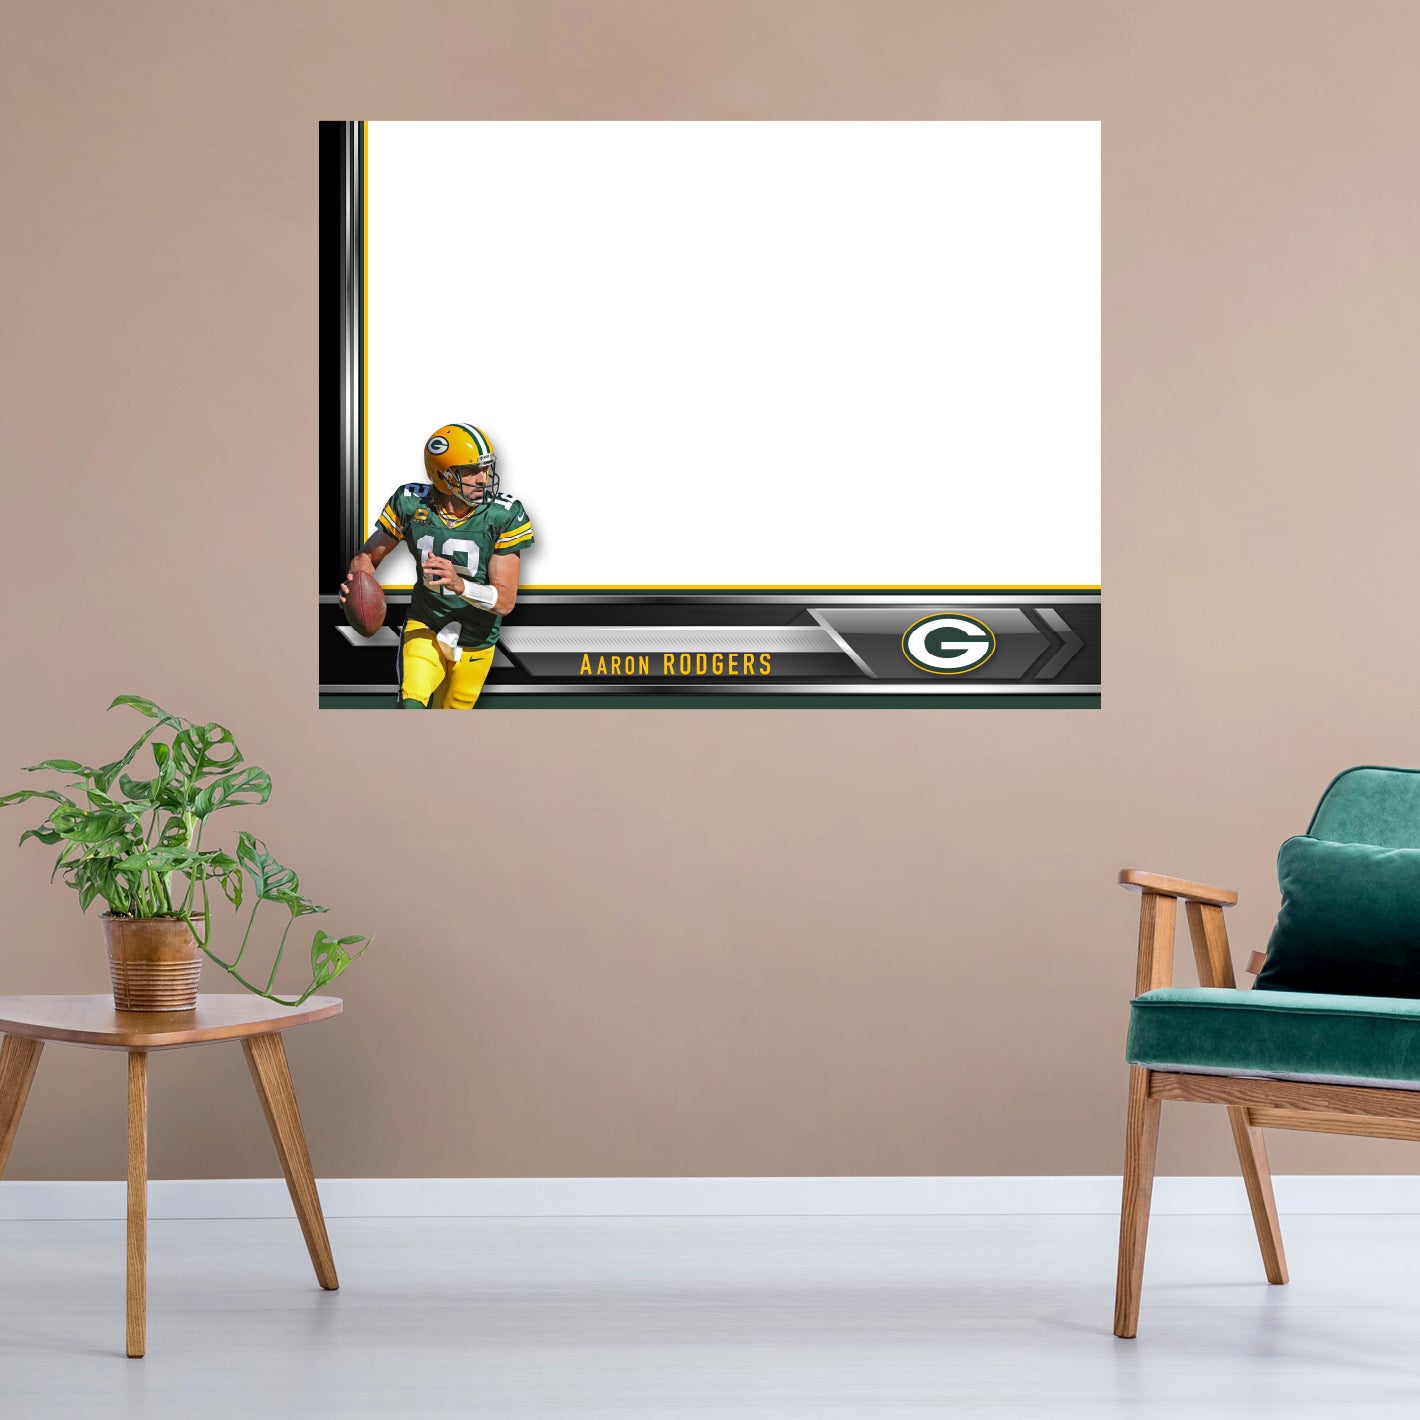 Green Bay Packers: Aaron Rodgers Dry Erase Whiteboard - Officially Licensed NFL Removable Adhesive Decal